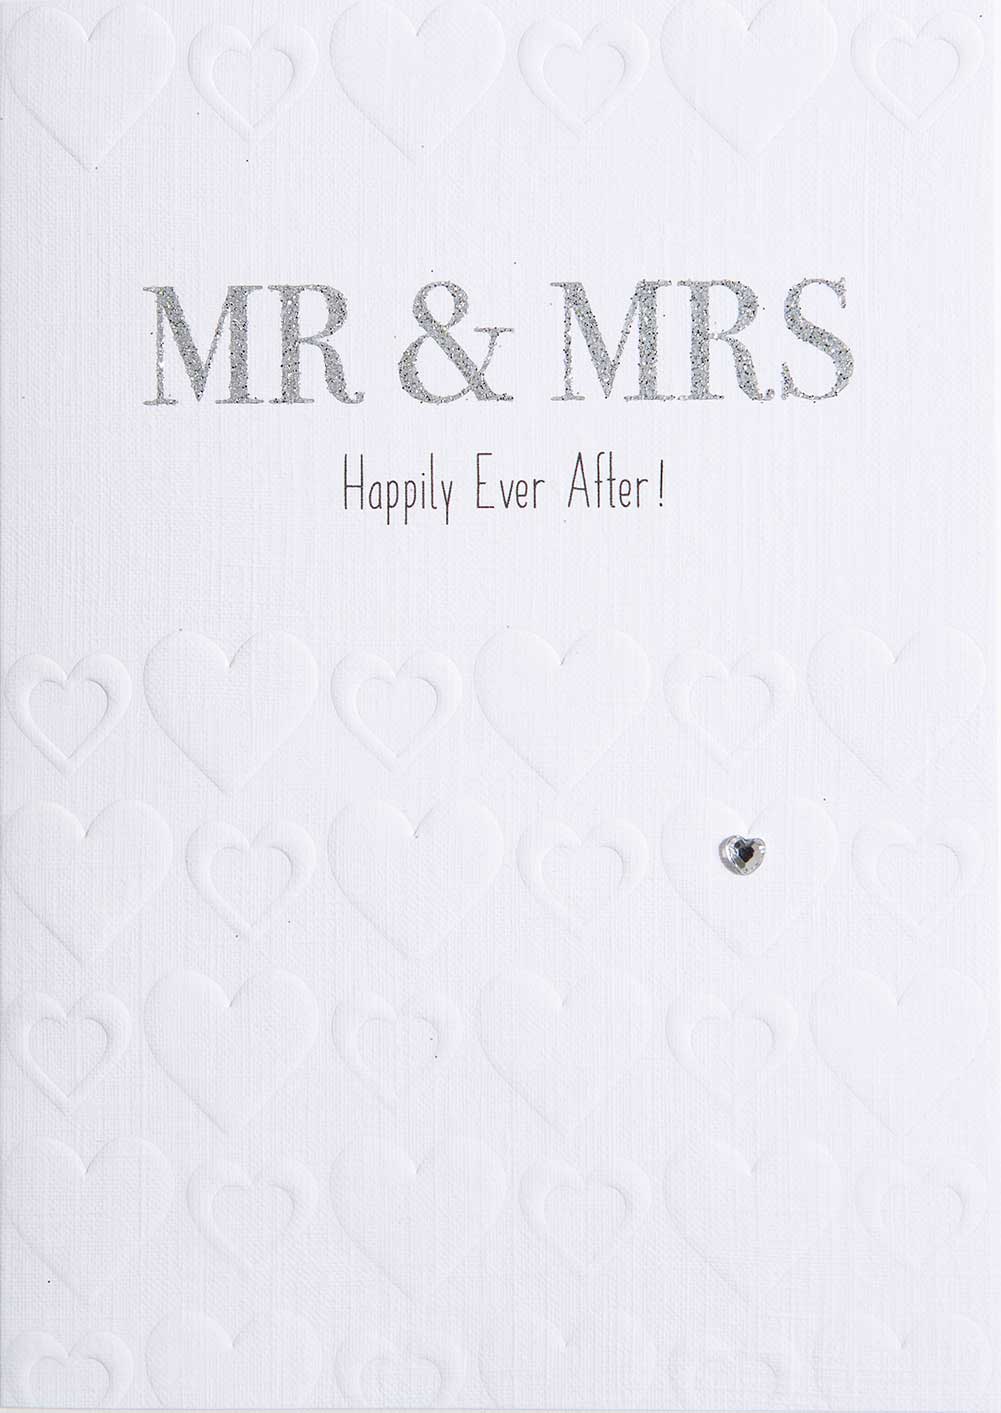 Mr & Mrs Happily Ever After Card